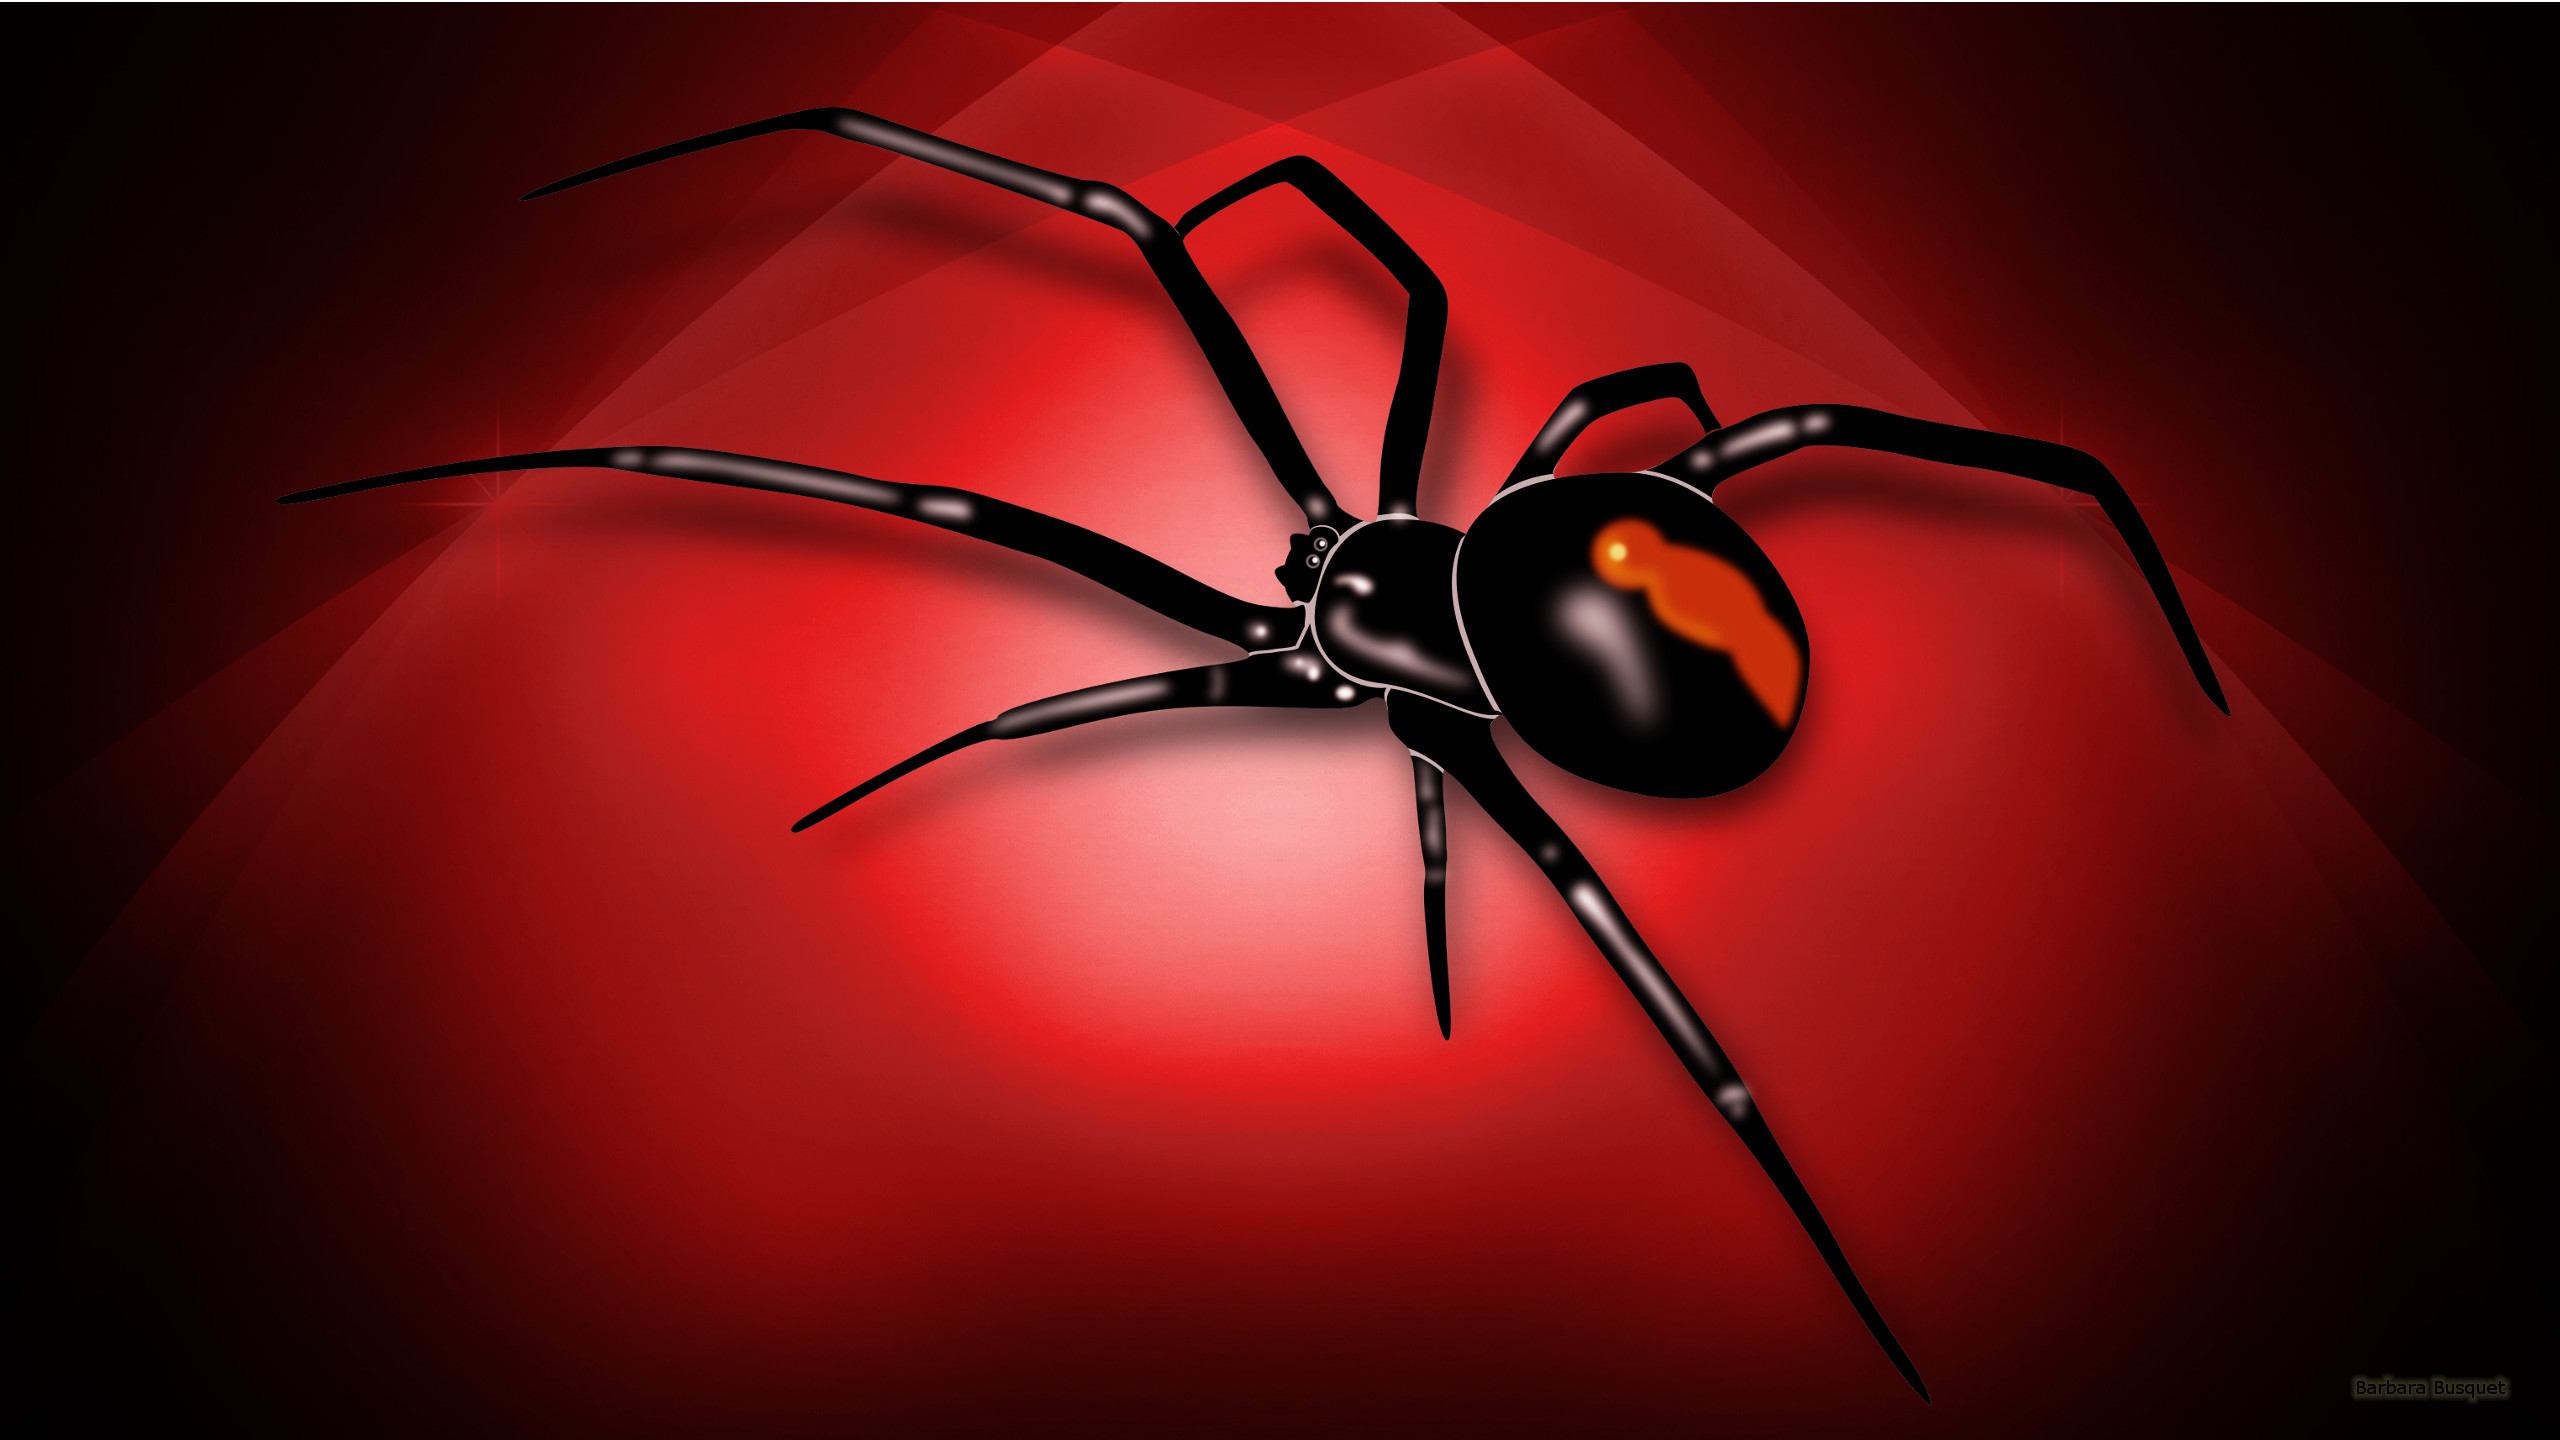 2560x1440 45 Spider Images for Free Spider Wallpapers)